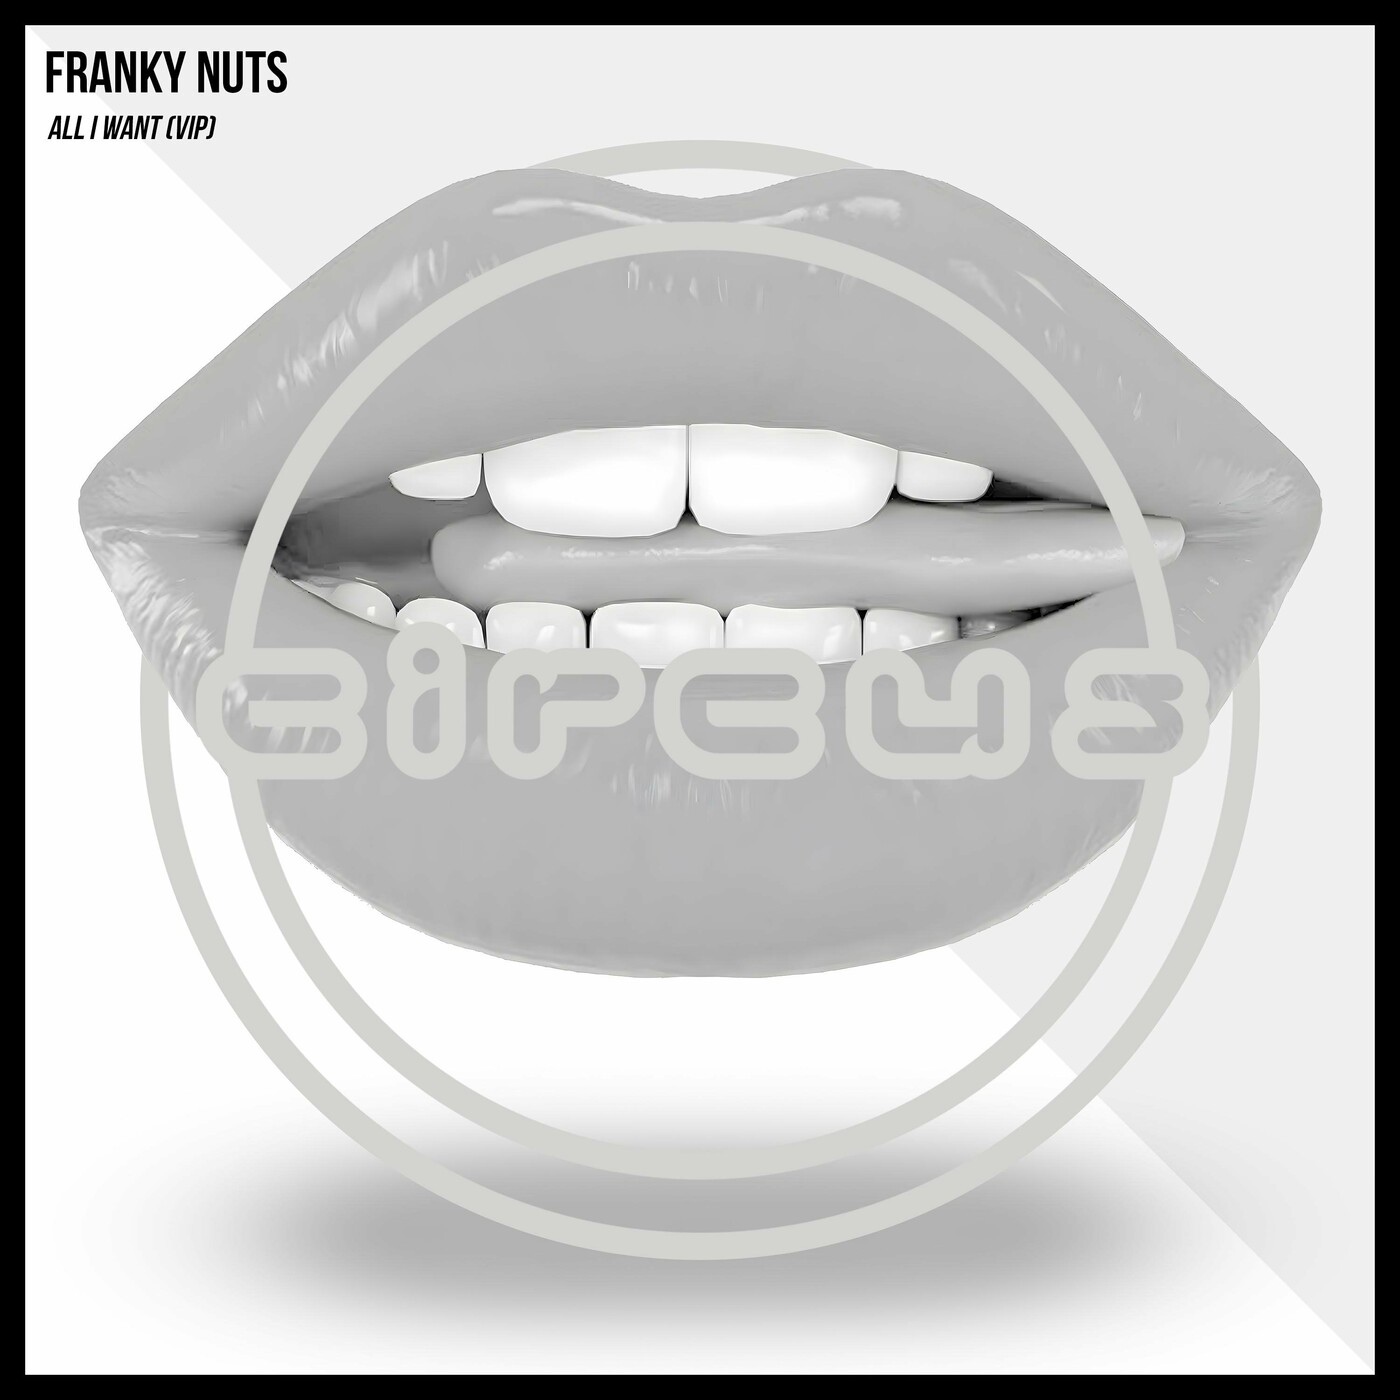 Franky Nuts - All I Want (VIP)